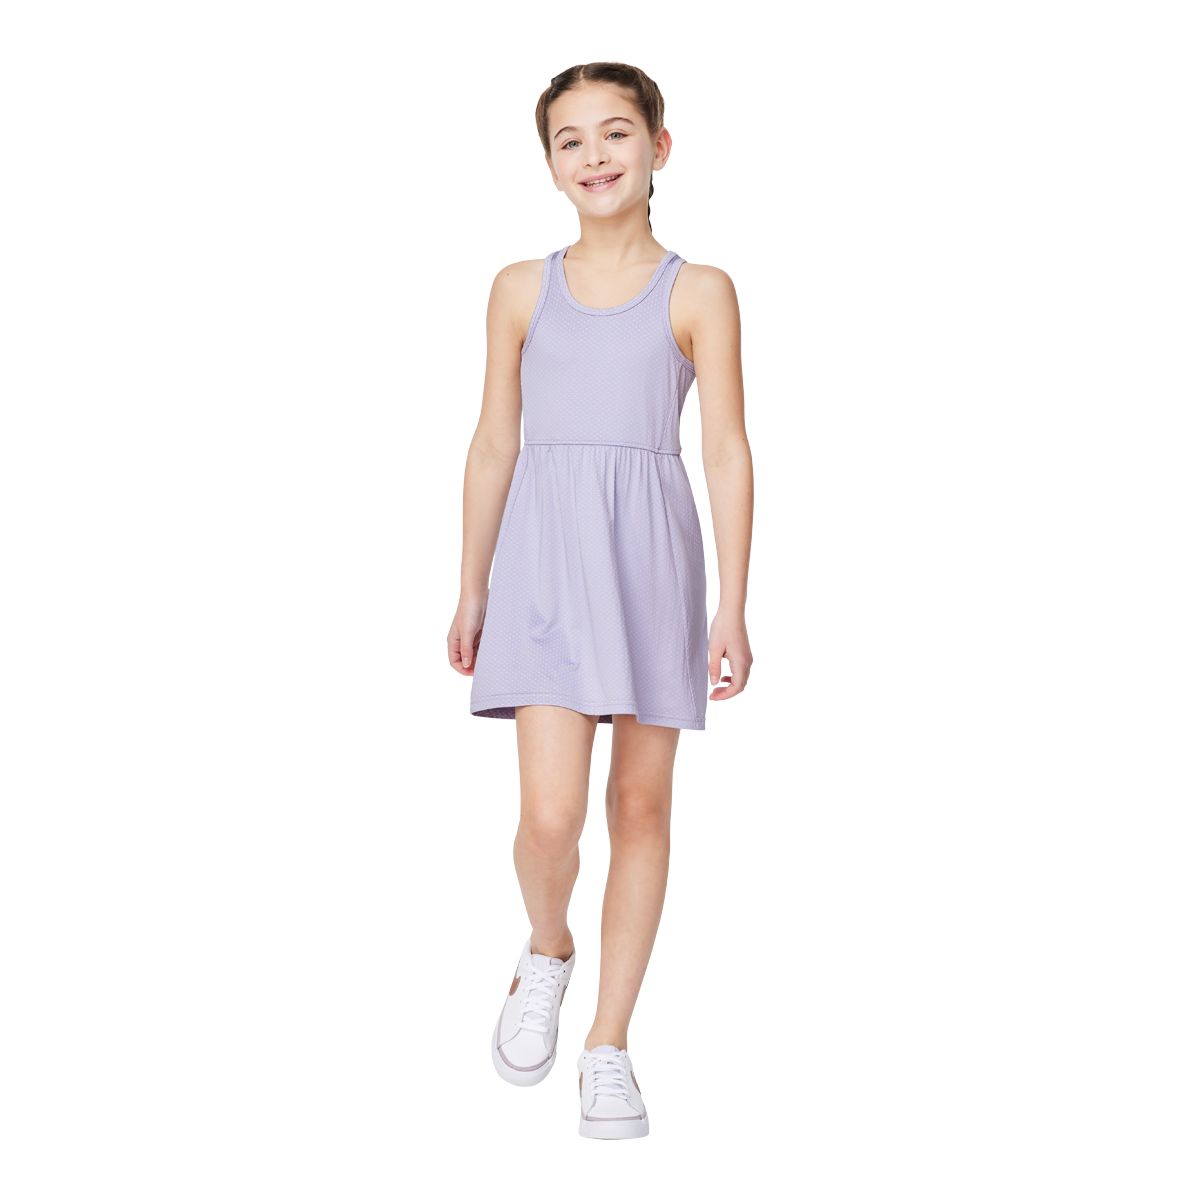 https://media-www.sportchek.ca/product/div-03-softgoods/dpt-72-casual-clothing/sdpt-04-girls/333945514/fwd-active-dress-with-shorts-languid-q123--5a1b404b-6919-4cb3-a095-4d086ba2a5f8-jpgrendition.jpg?imdensity=1&imwidth=1244&impolicy=mZoom